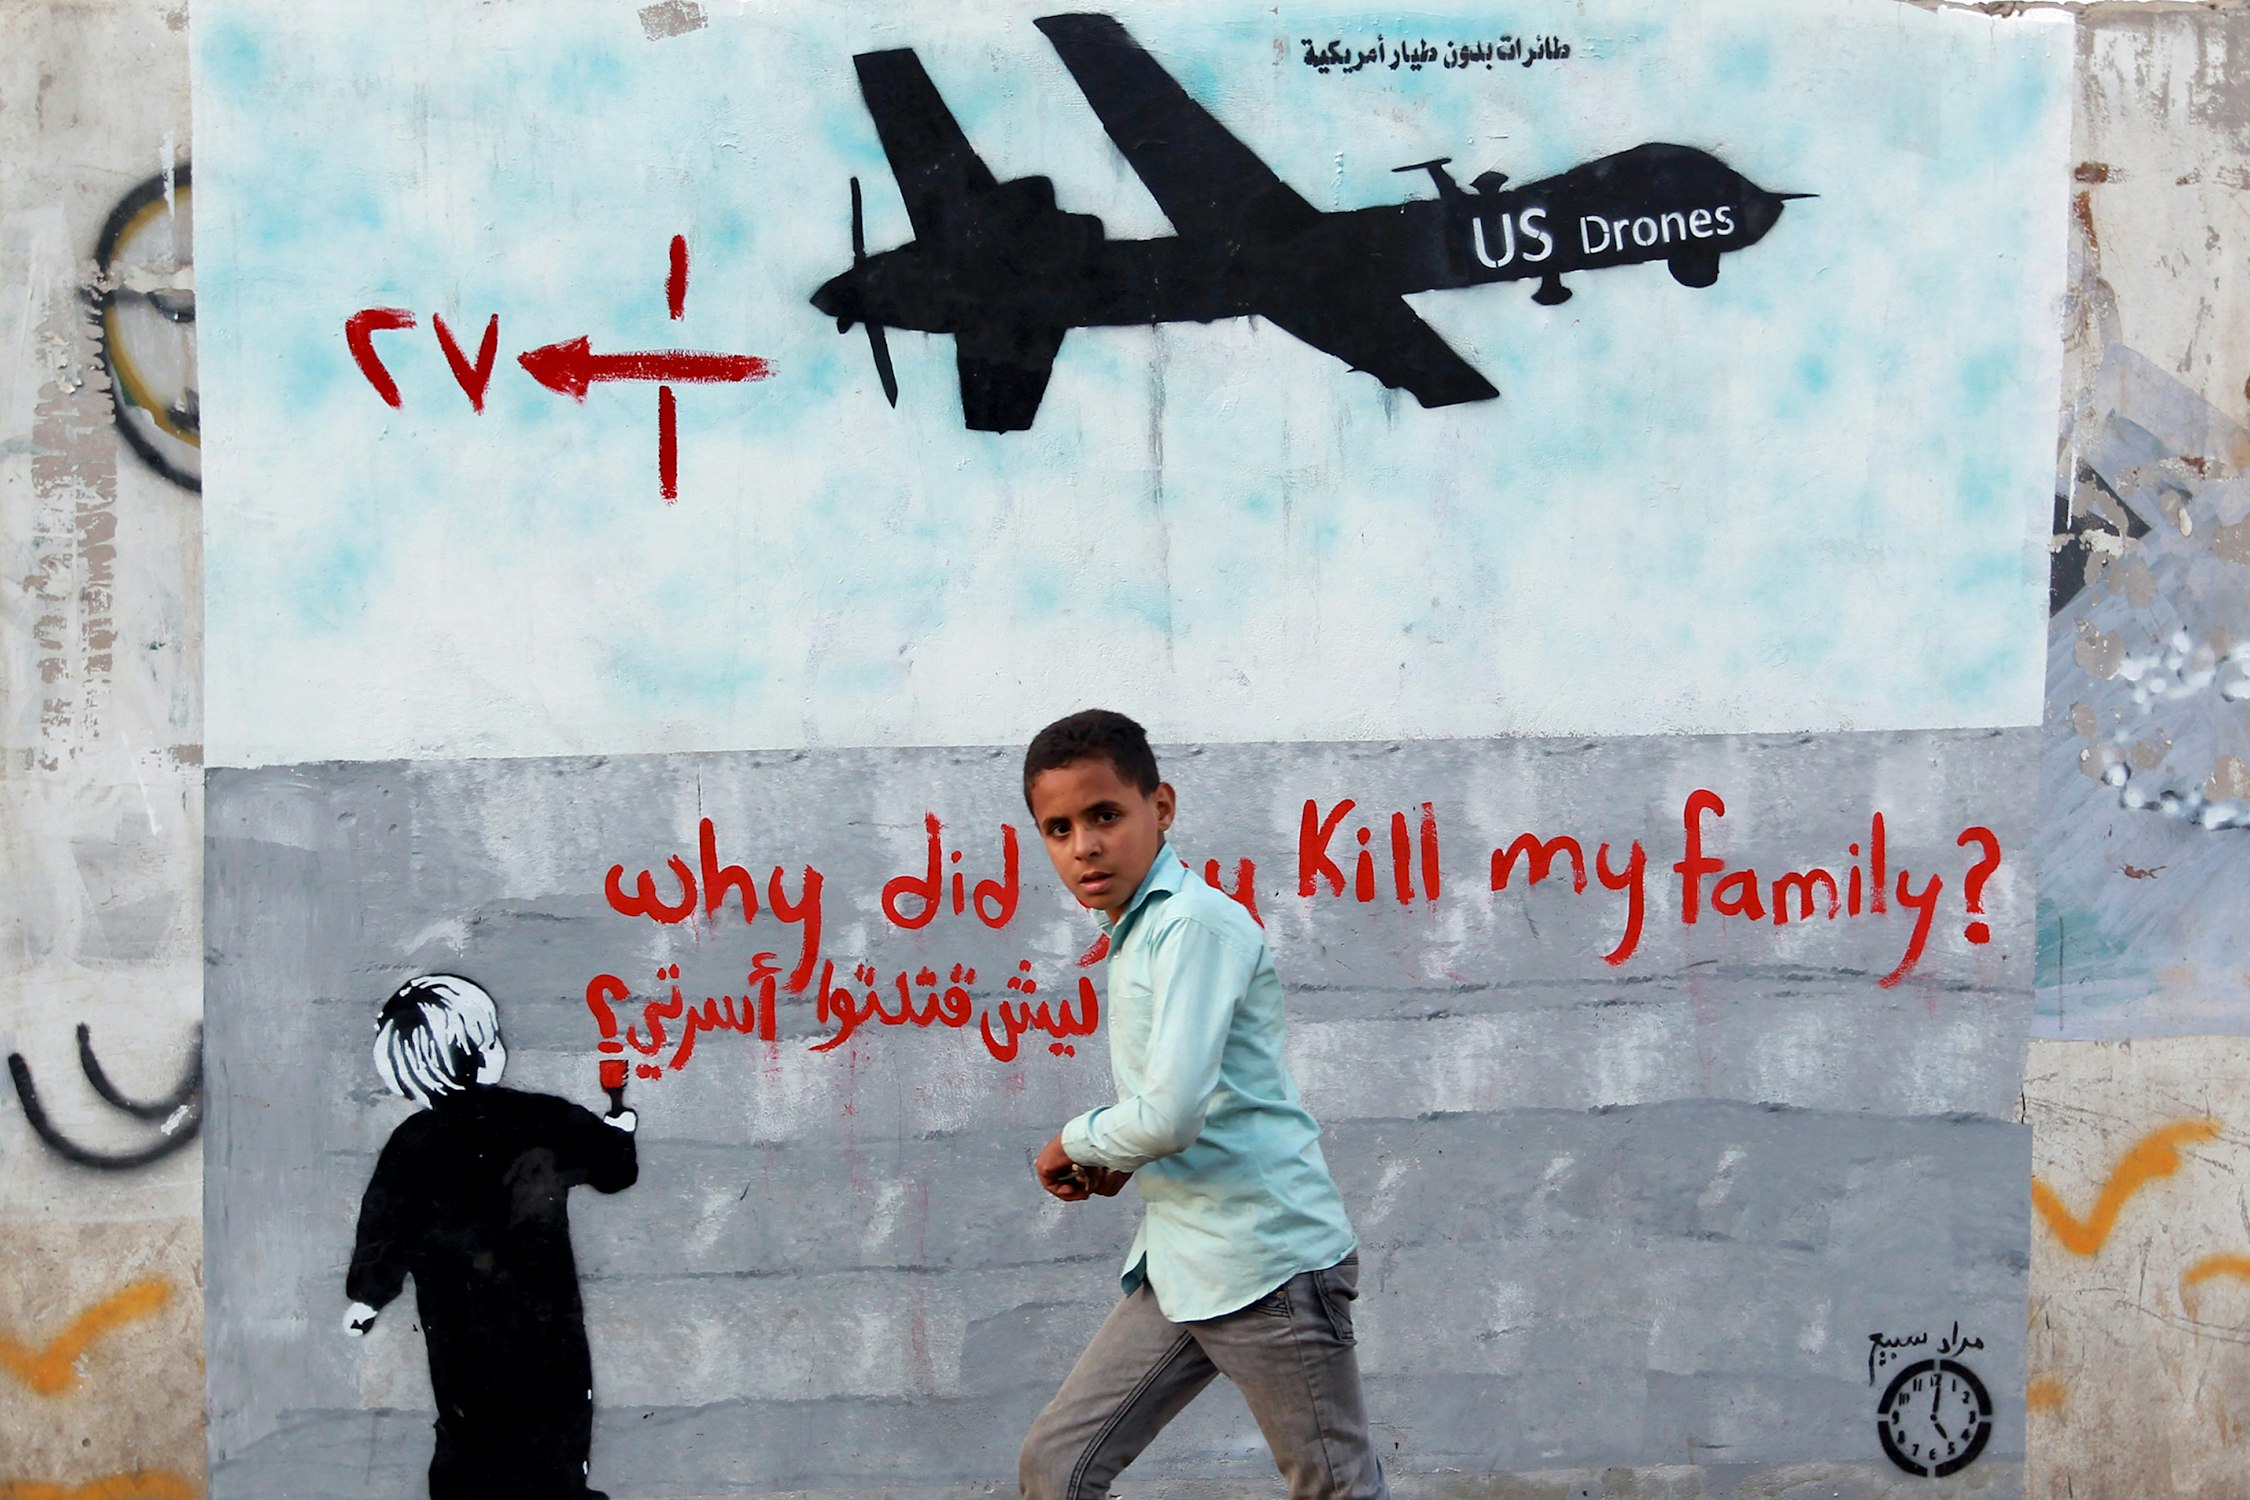 Obama's New Drone Policy Is a Step for Transparency - Open Society Foundations